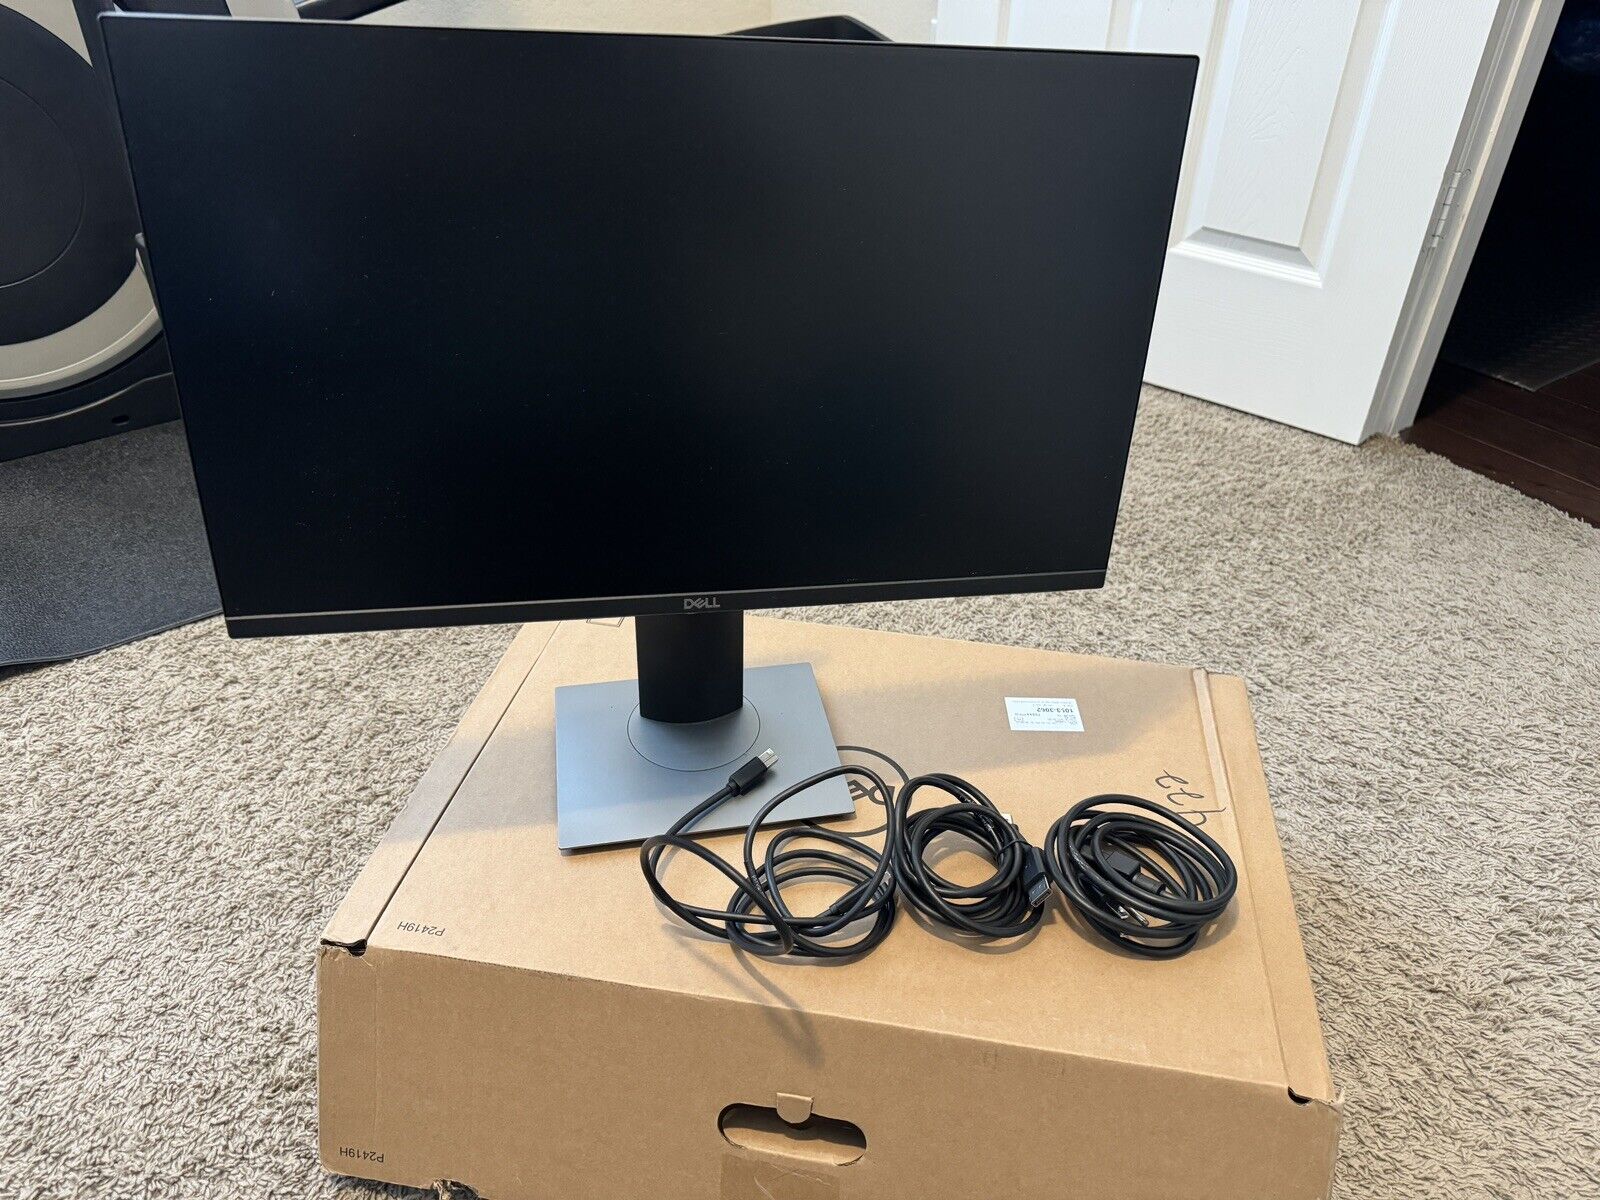 Dell P2419H LED Monitor Full HD (1080p) - USED